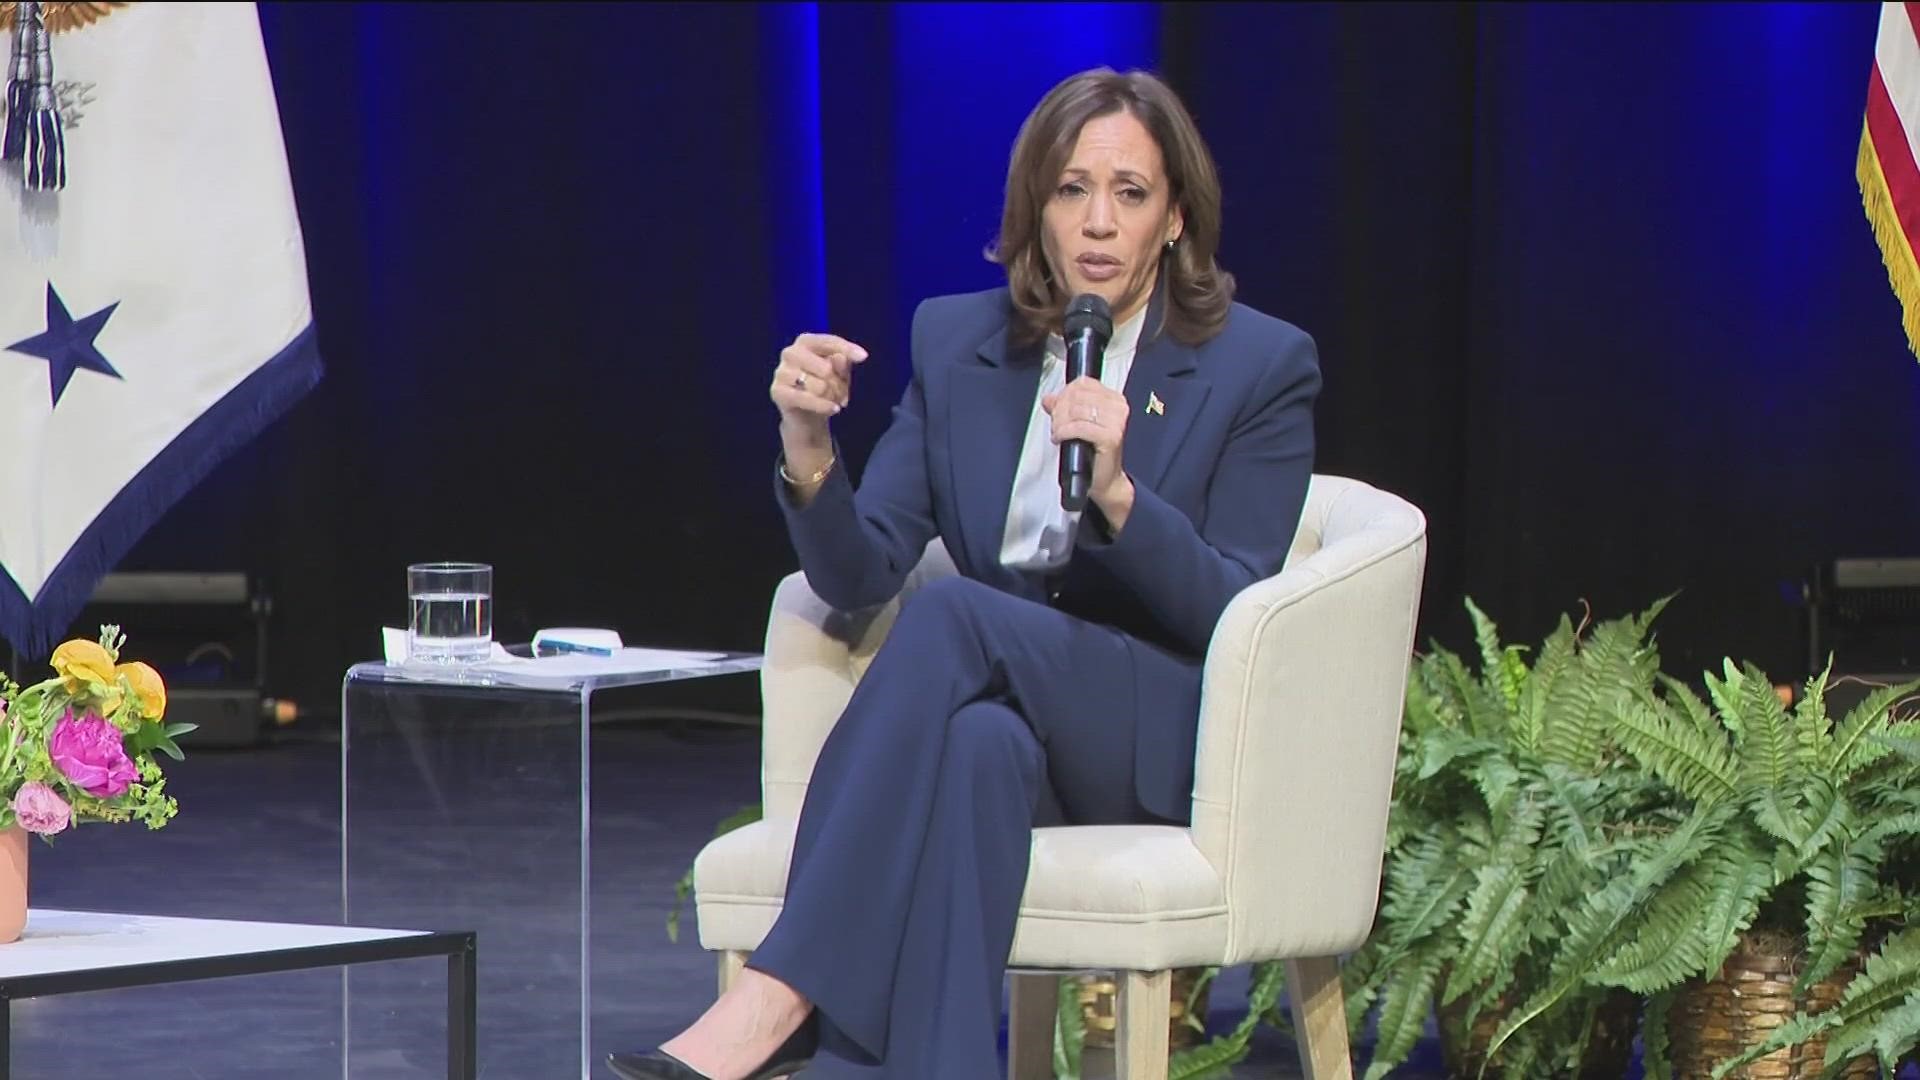 During the visit Vice President Harris participated in a moderated conversation focusing on the Administration's investments and actions to combat the climate crisis